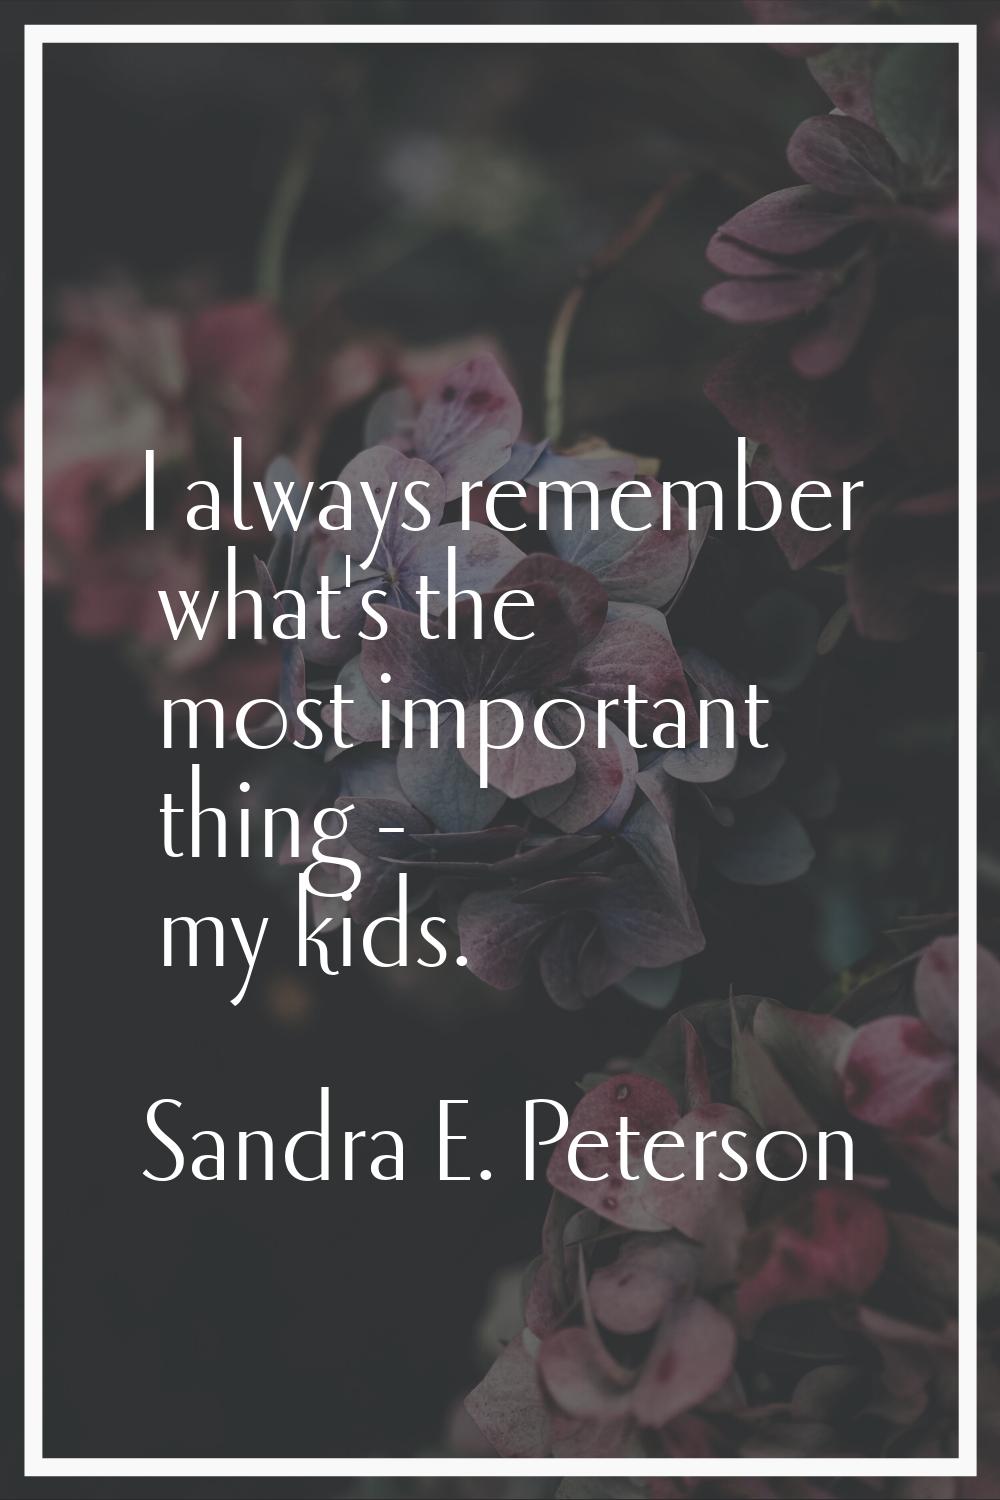 I always remember what's the most important thing - my kids.